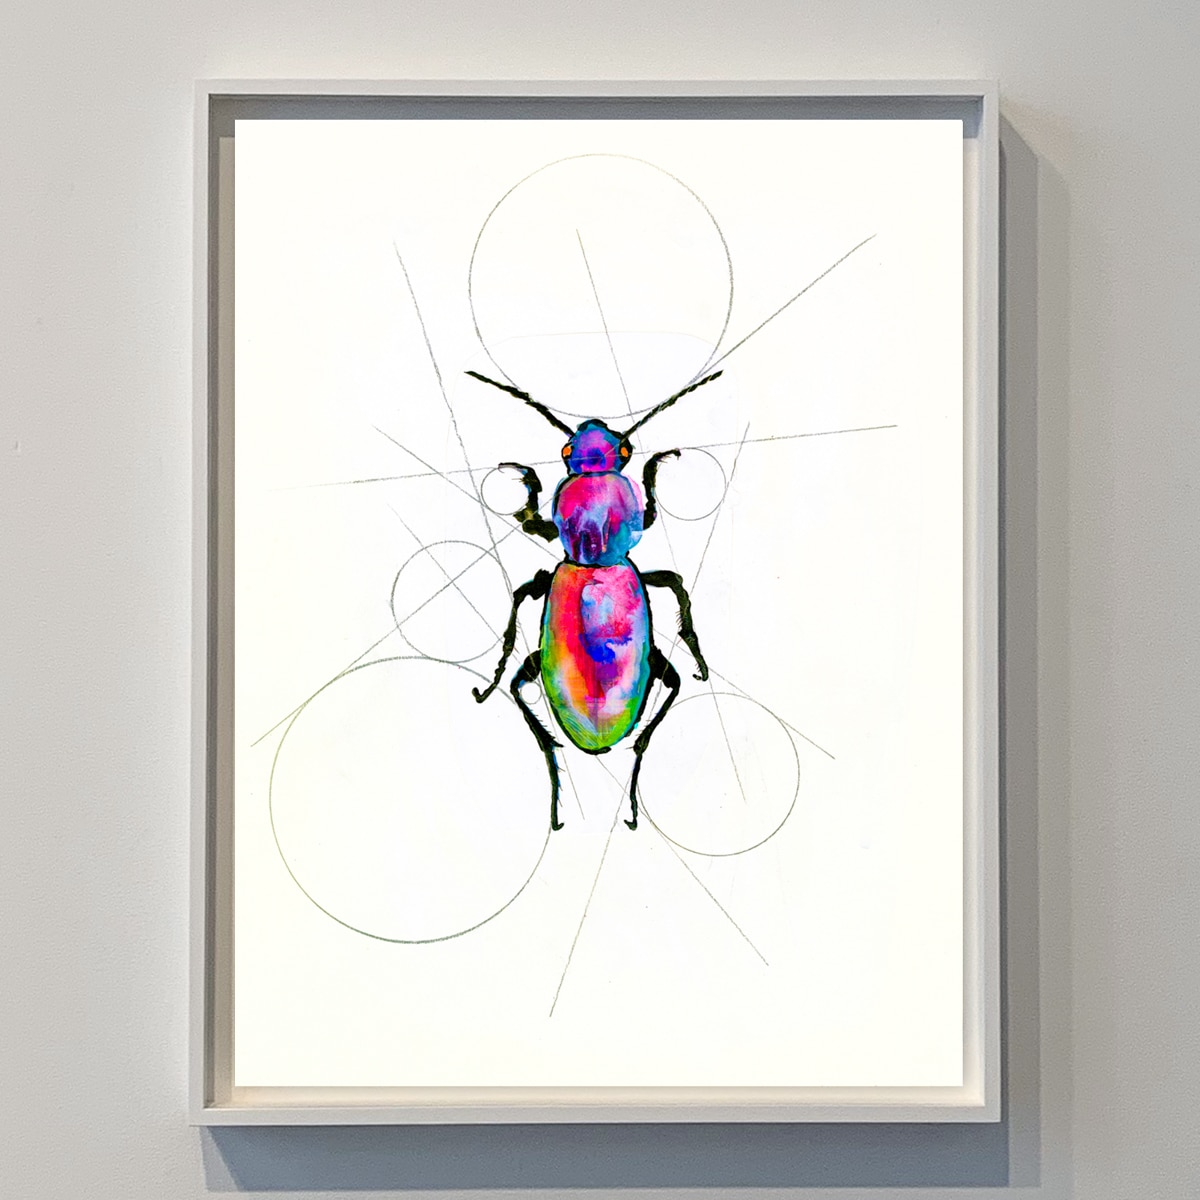 contemporary artwork of an ant by Gregory Beylerian